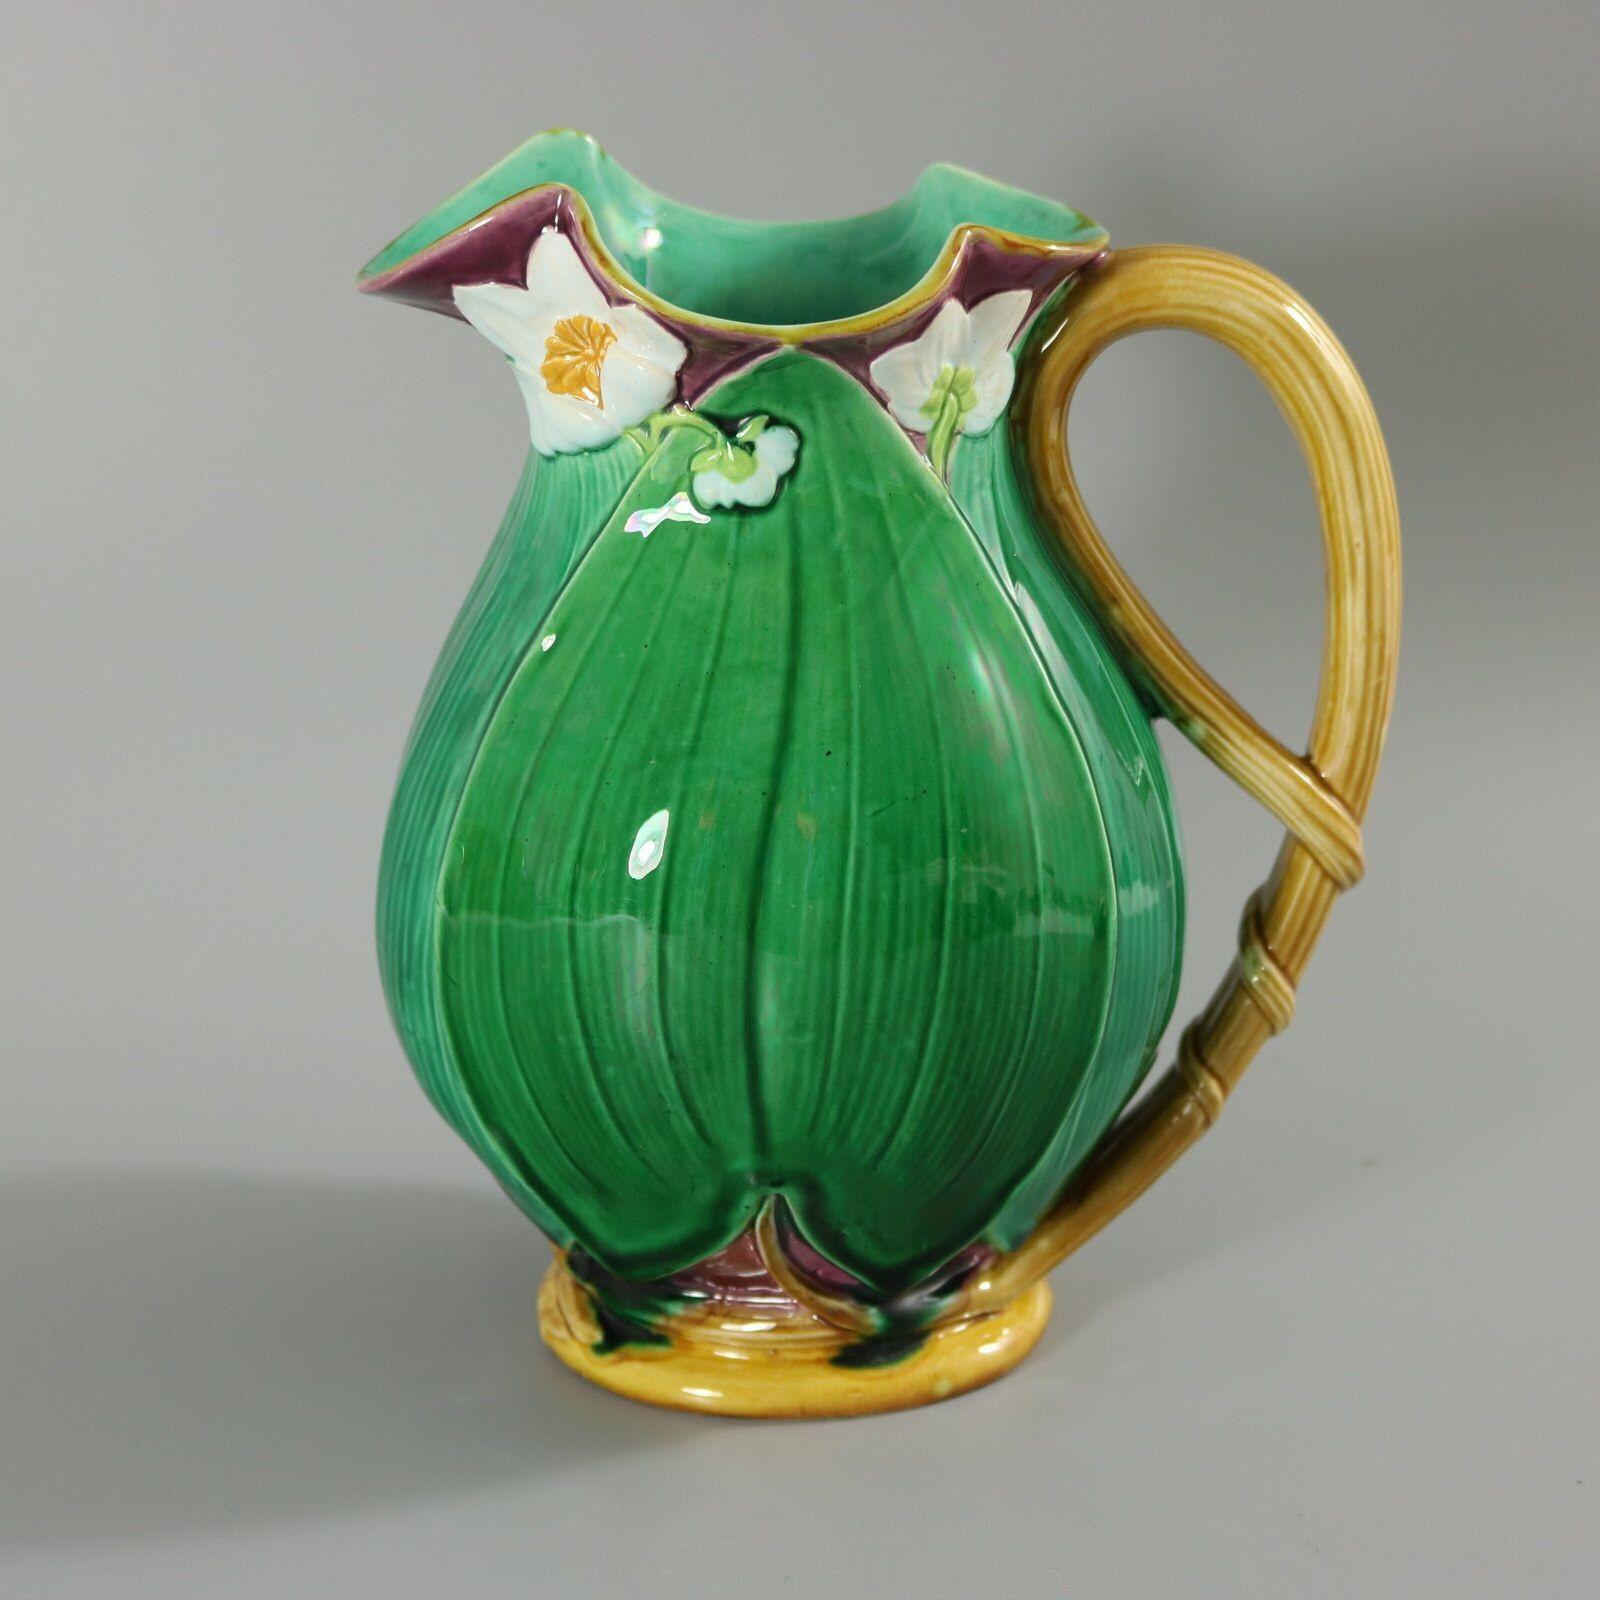 Minton Majolica jug/pitcher which features flowering lilies and lily pads. Colouration: green, white, dark pink, are predominant. The piece bears maker's marks for the Minton pottery. Bears a pattern number, '1228 12'. Marks include a factory